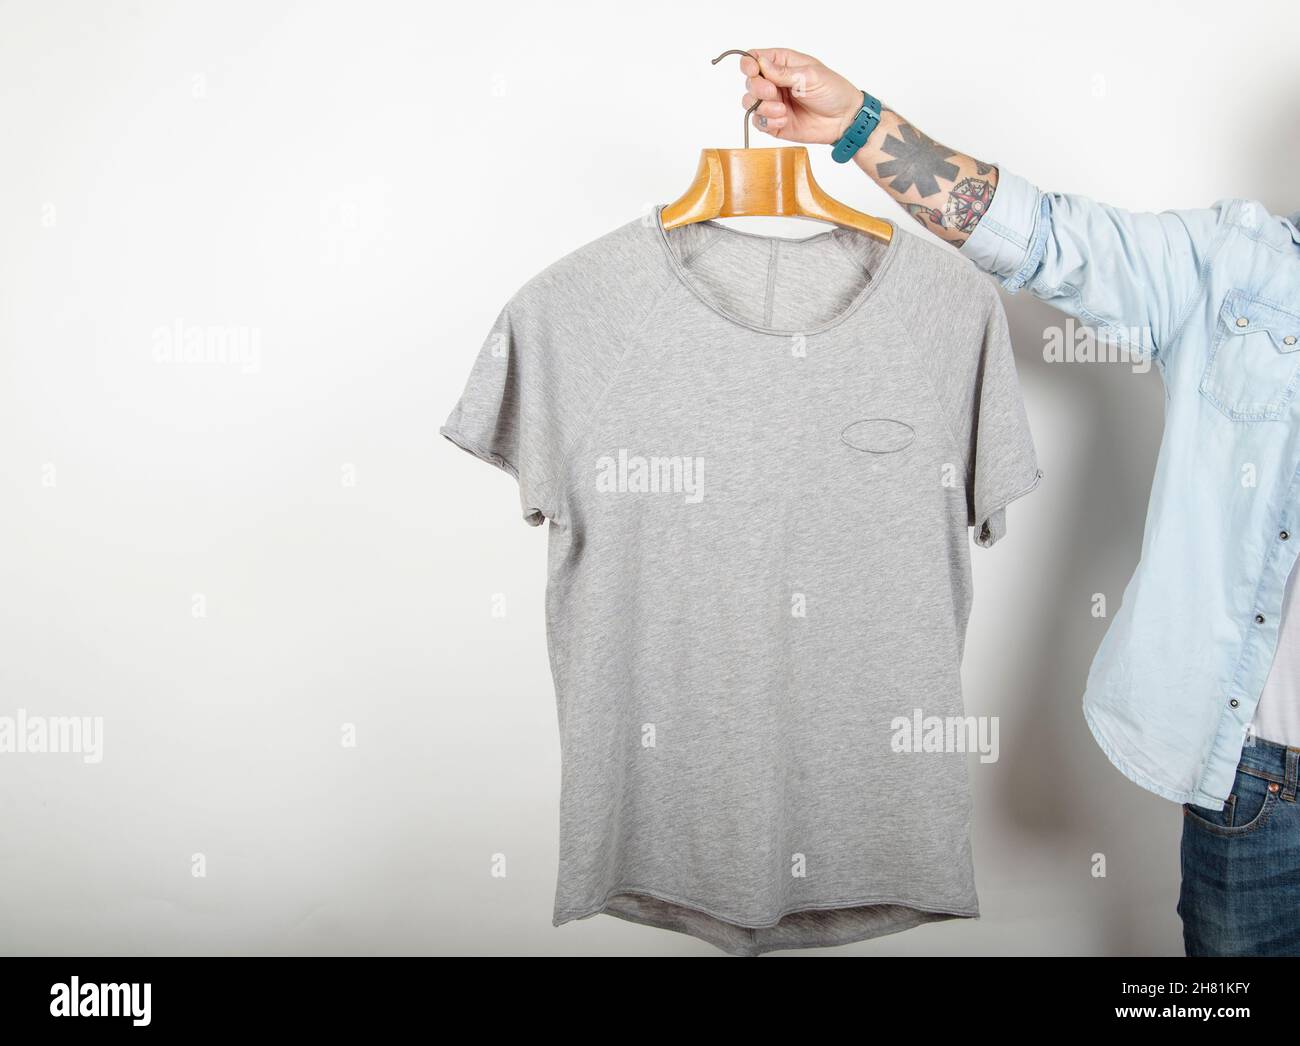 https://c8.alamy.com/comp/2H81KFY/tattooed-male-hand-holds-a-hanger-with-premium-quality-fine-cotton-gray-t-shirt-on-a-white-background-mockup-2H81KFY.jpg